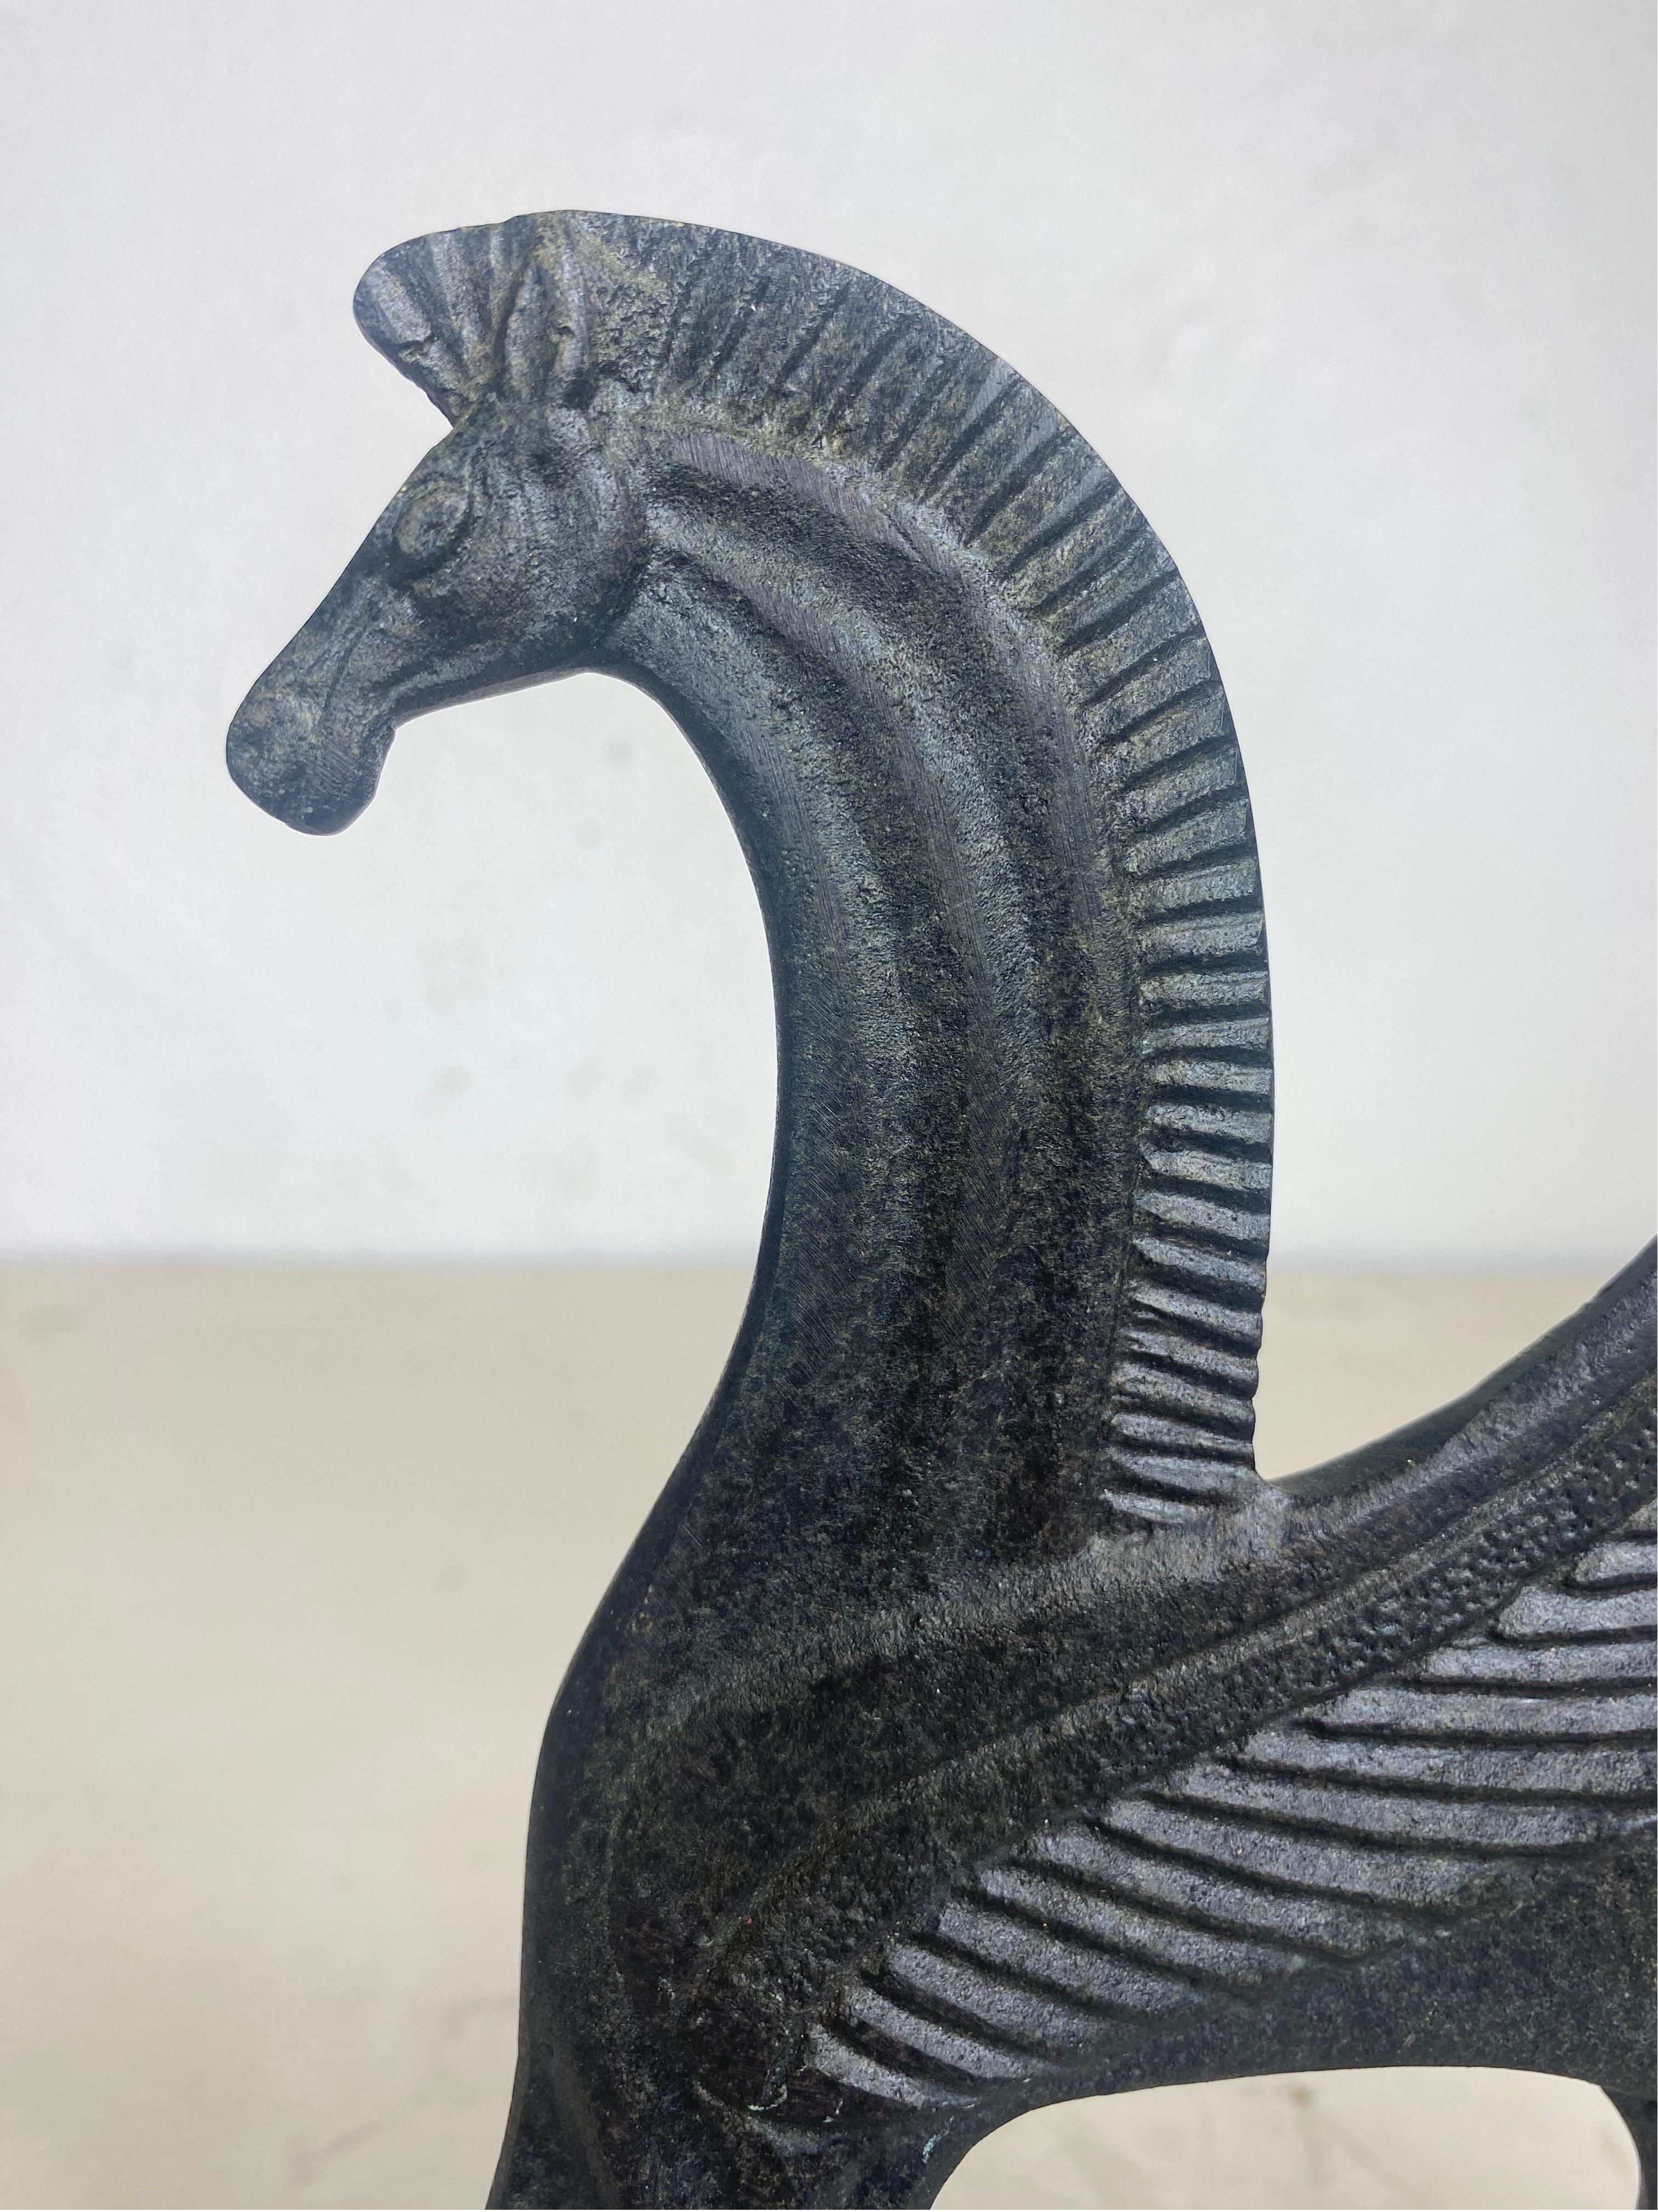 This is a mid century vintage cast iron sculpture of a mythical horse with wings and a figure. The sculpture has a dark bronze patina finish to the surface. The stylized horse has wings and the figure is carrying a spear. This piece is American made